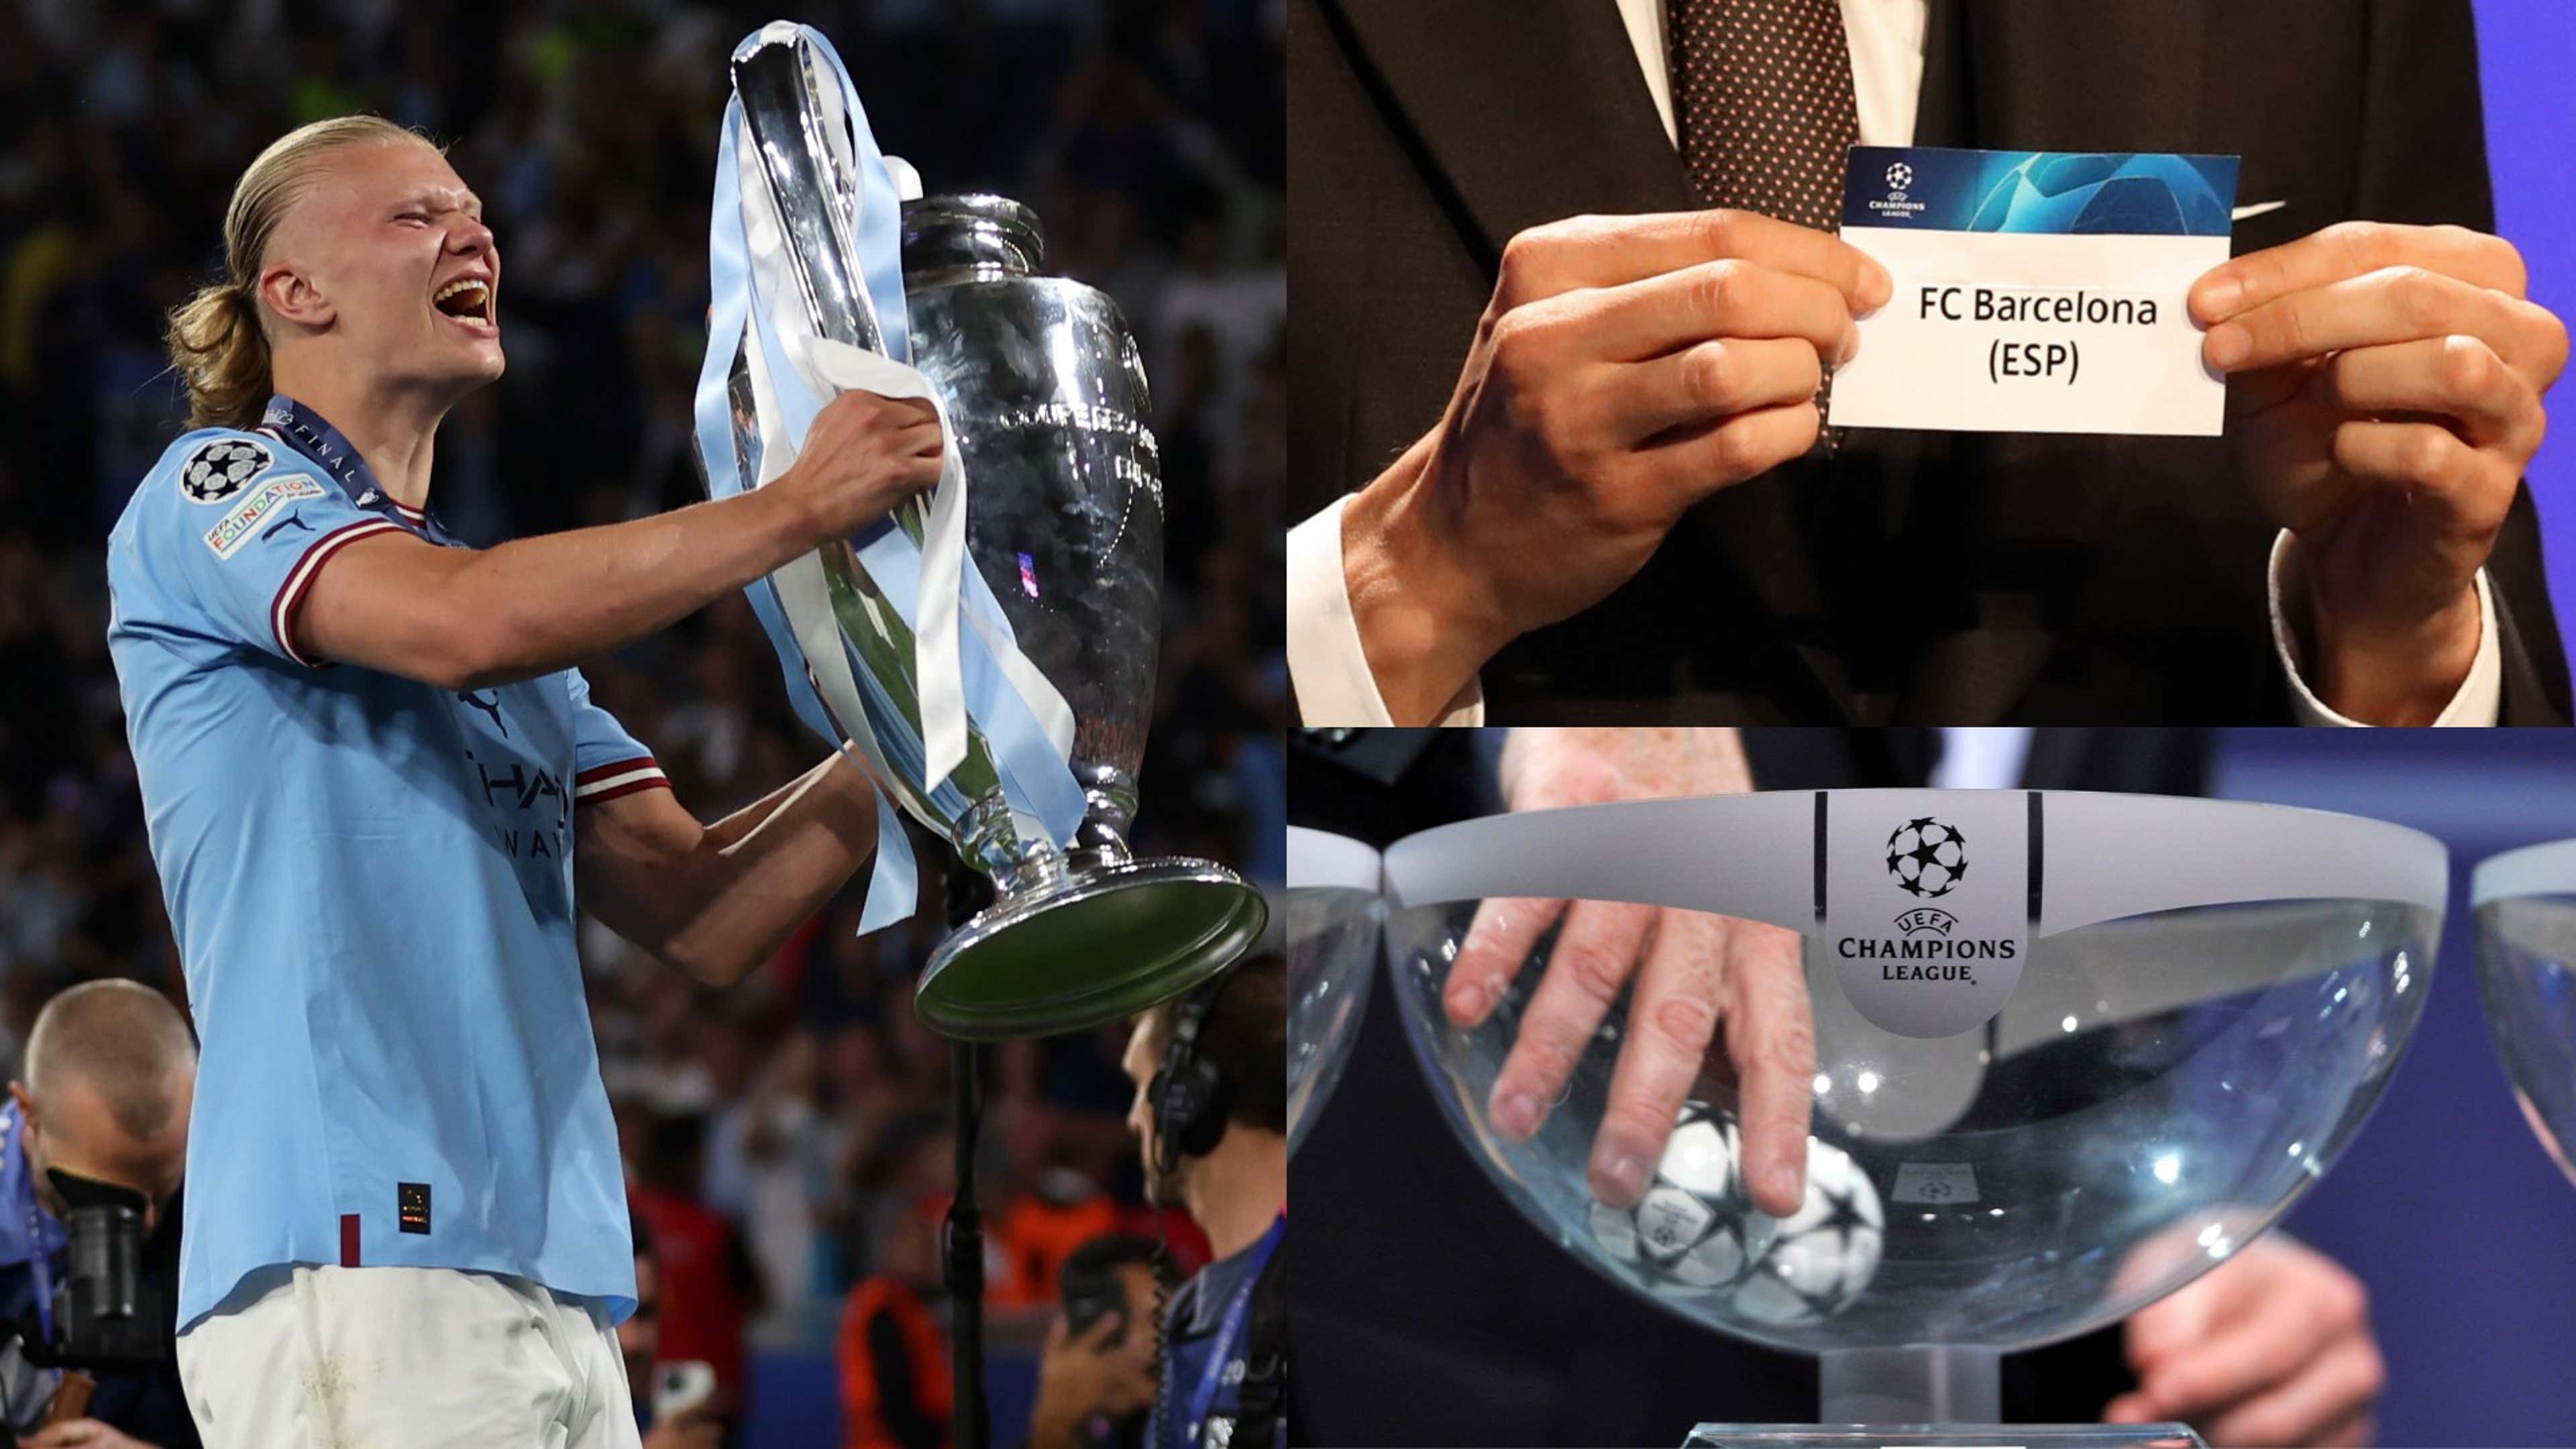 Teams qualified for Champions League 2023/24: Group stages confirmed by  UEFA draw